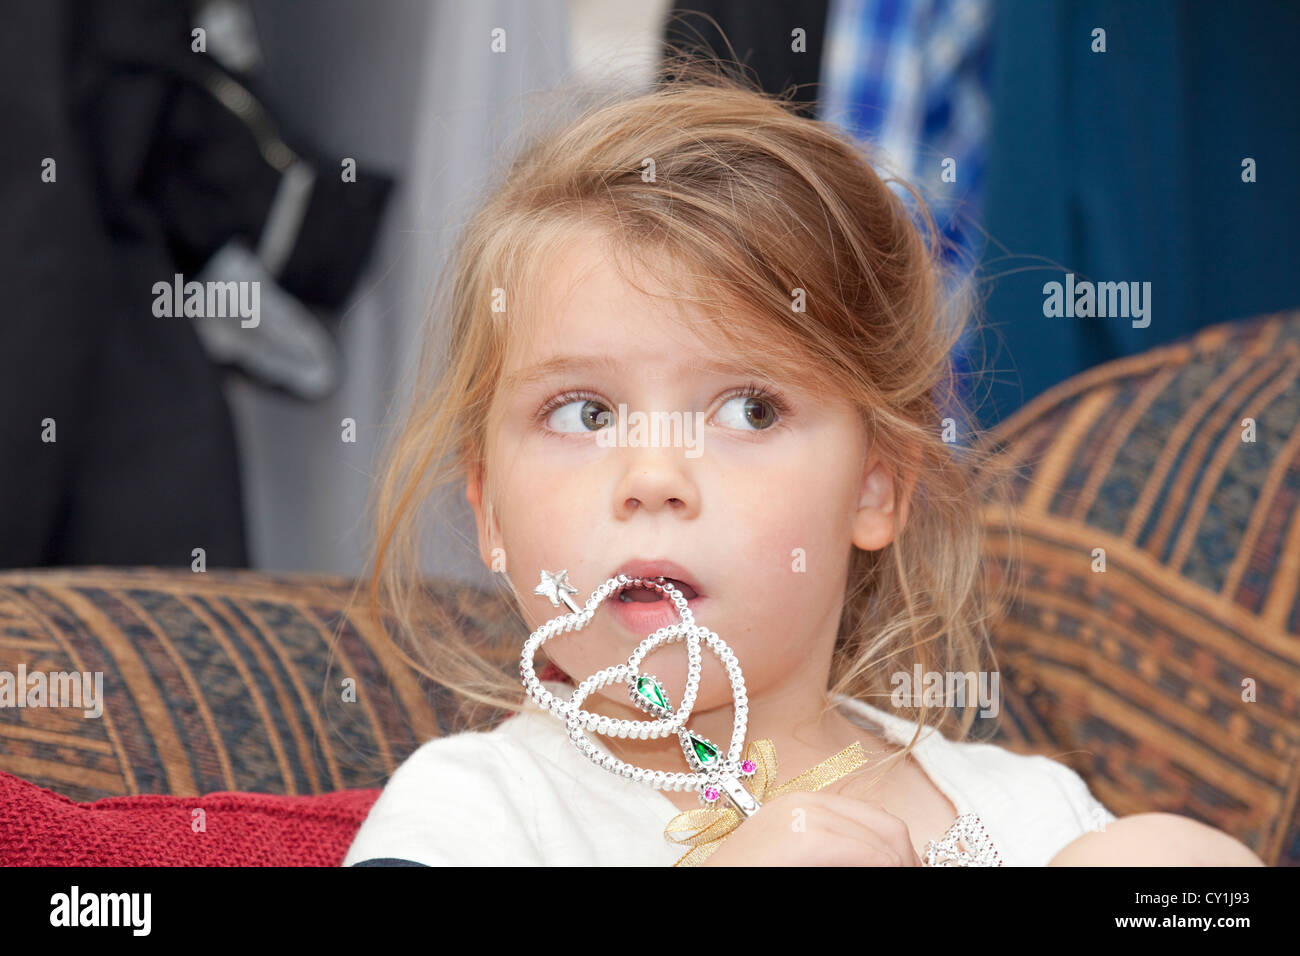 young child sat on sofa with toy wand Stock Photo